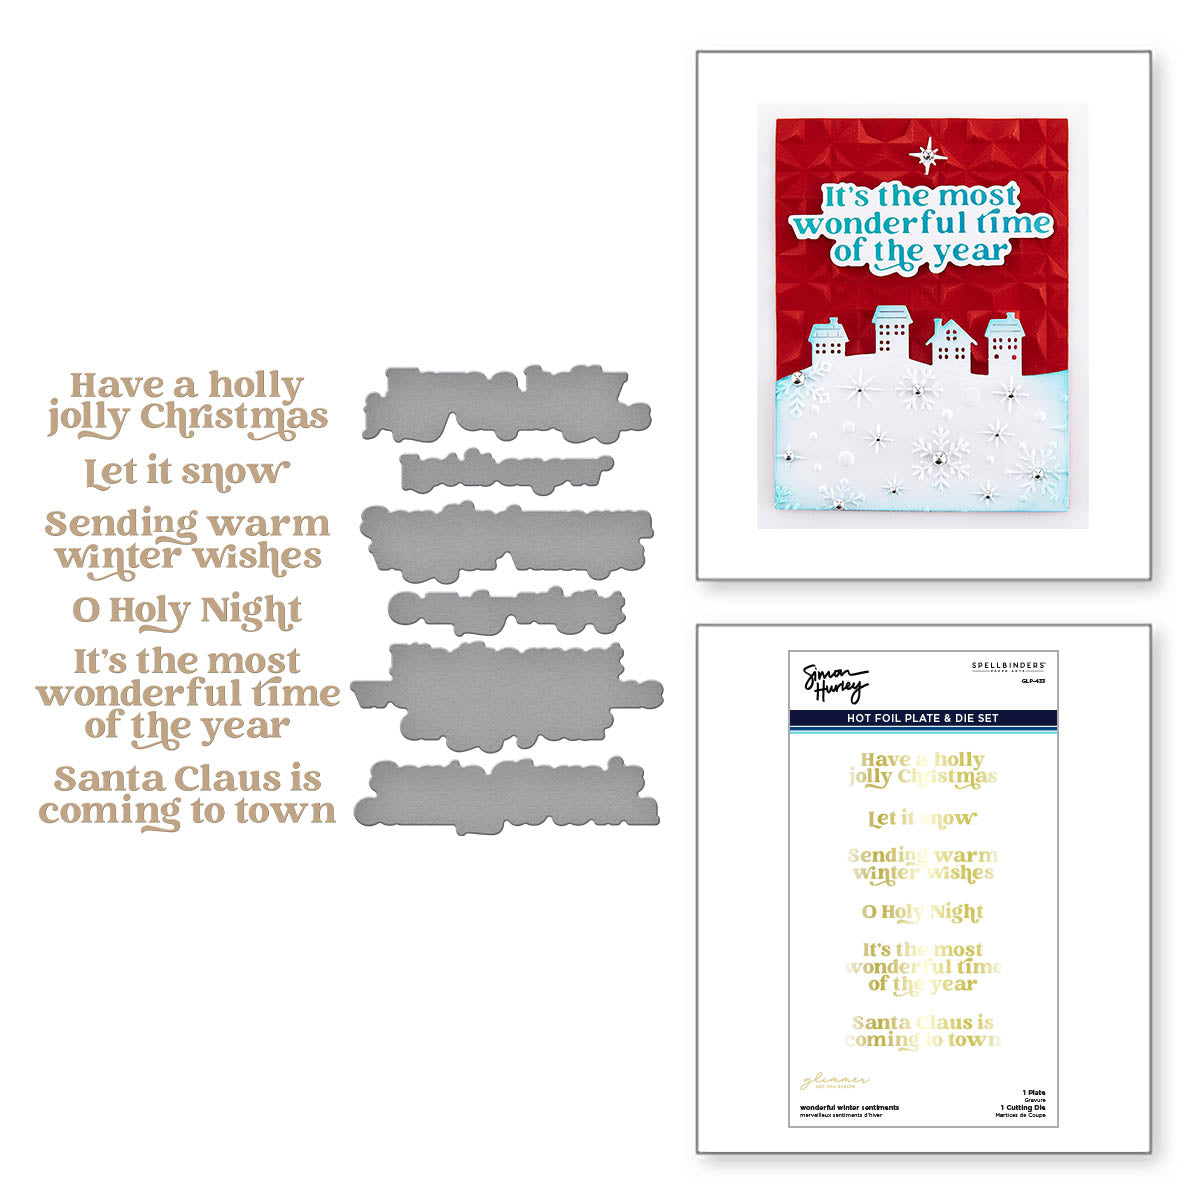 Spellbinders - Wonderful Winter Sentiments Glimmer Hot Foil Plate & Die Set from the Simon's Snow Globes Collection by Simon Hurley